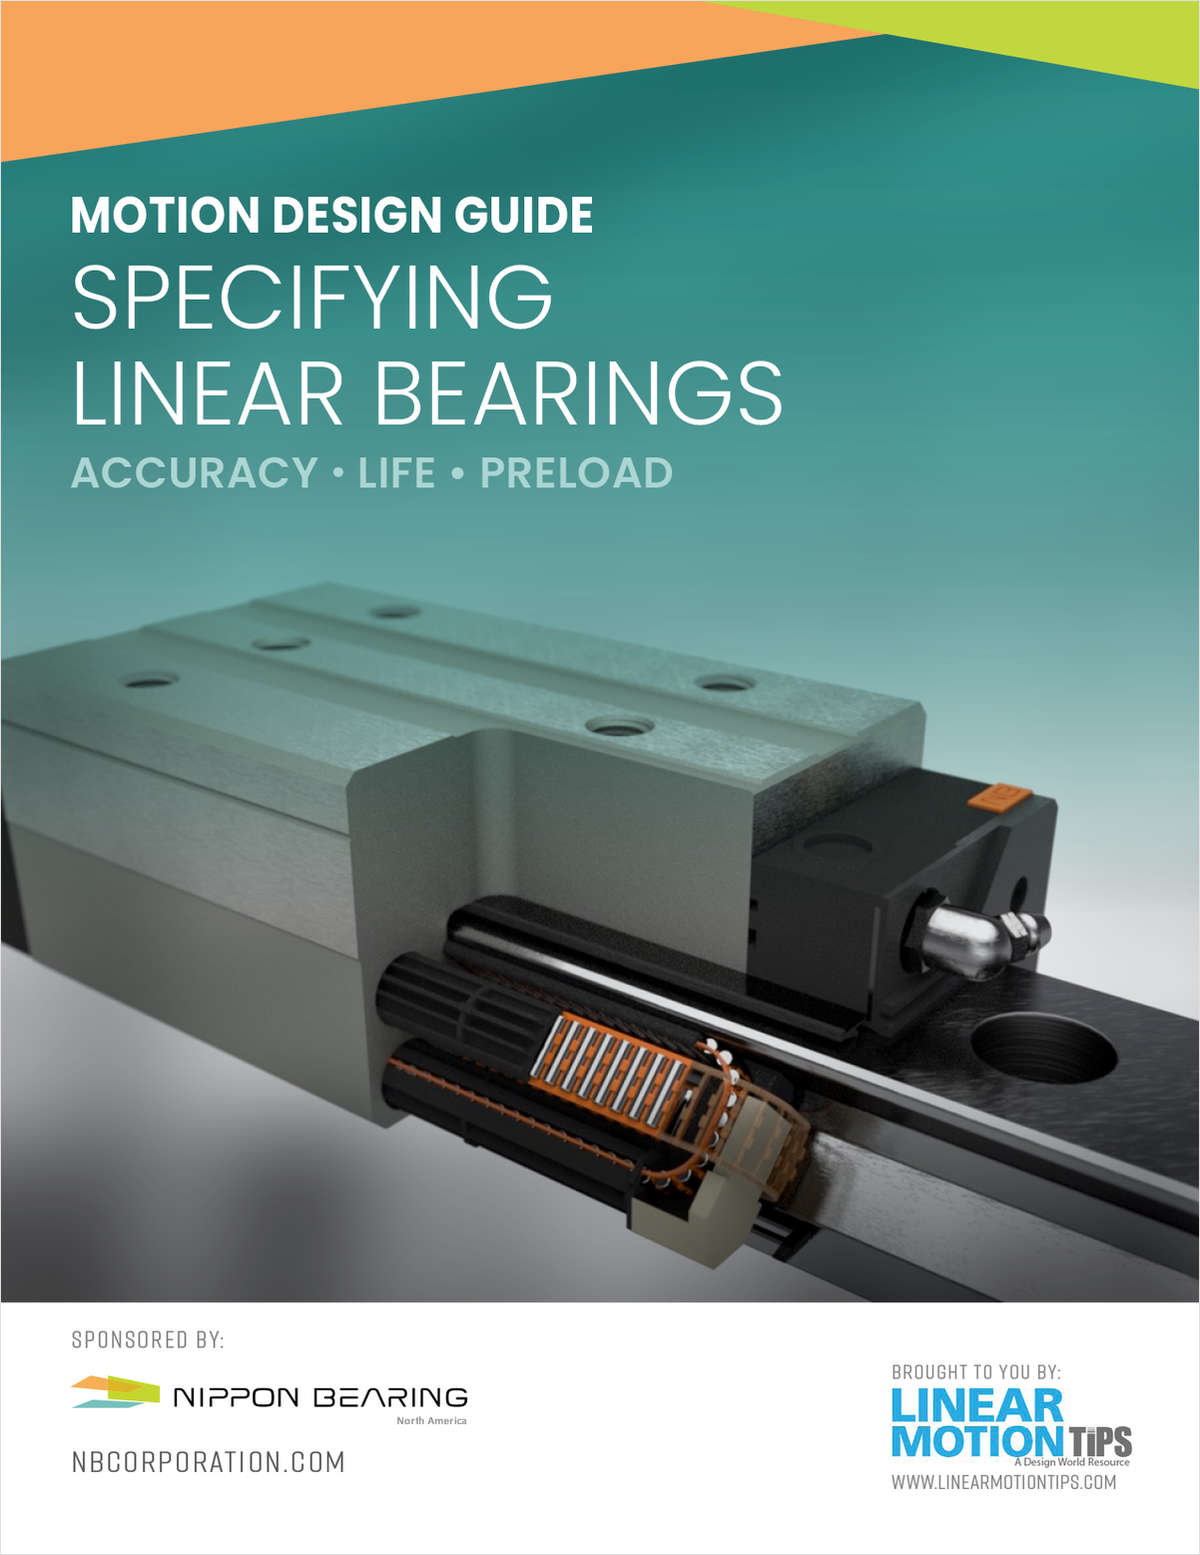 Design Guide on Specifying Linear Bearings (Accuracy - Preload - Life)